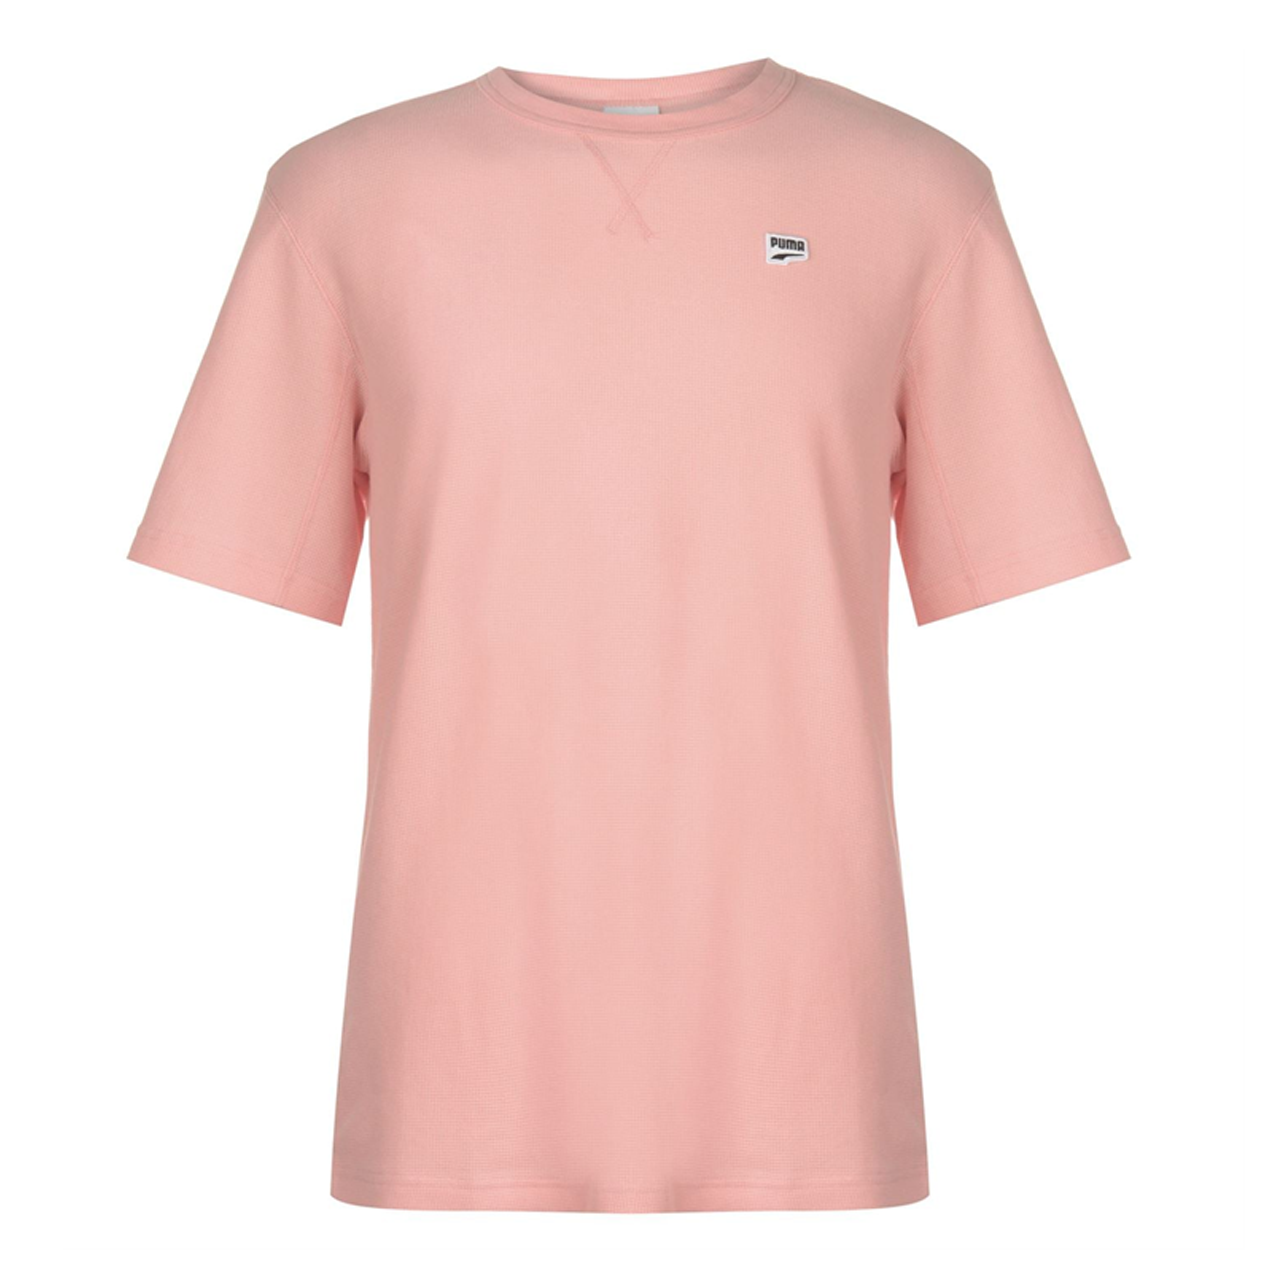 PUMA DOWNTOWN OVERSIZED TEE PINK 533890-01